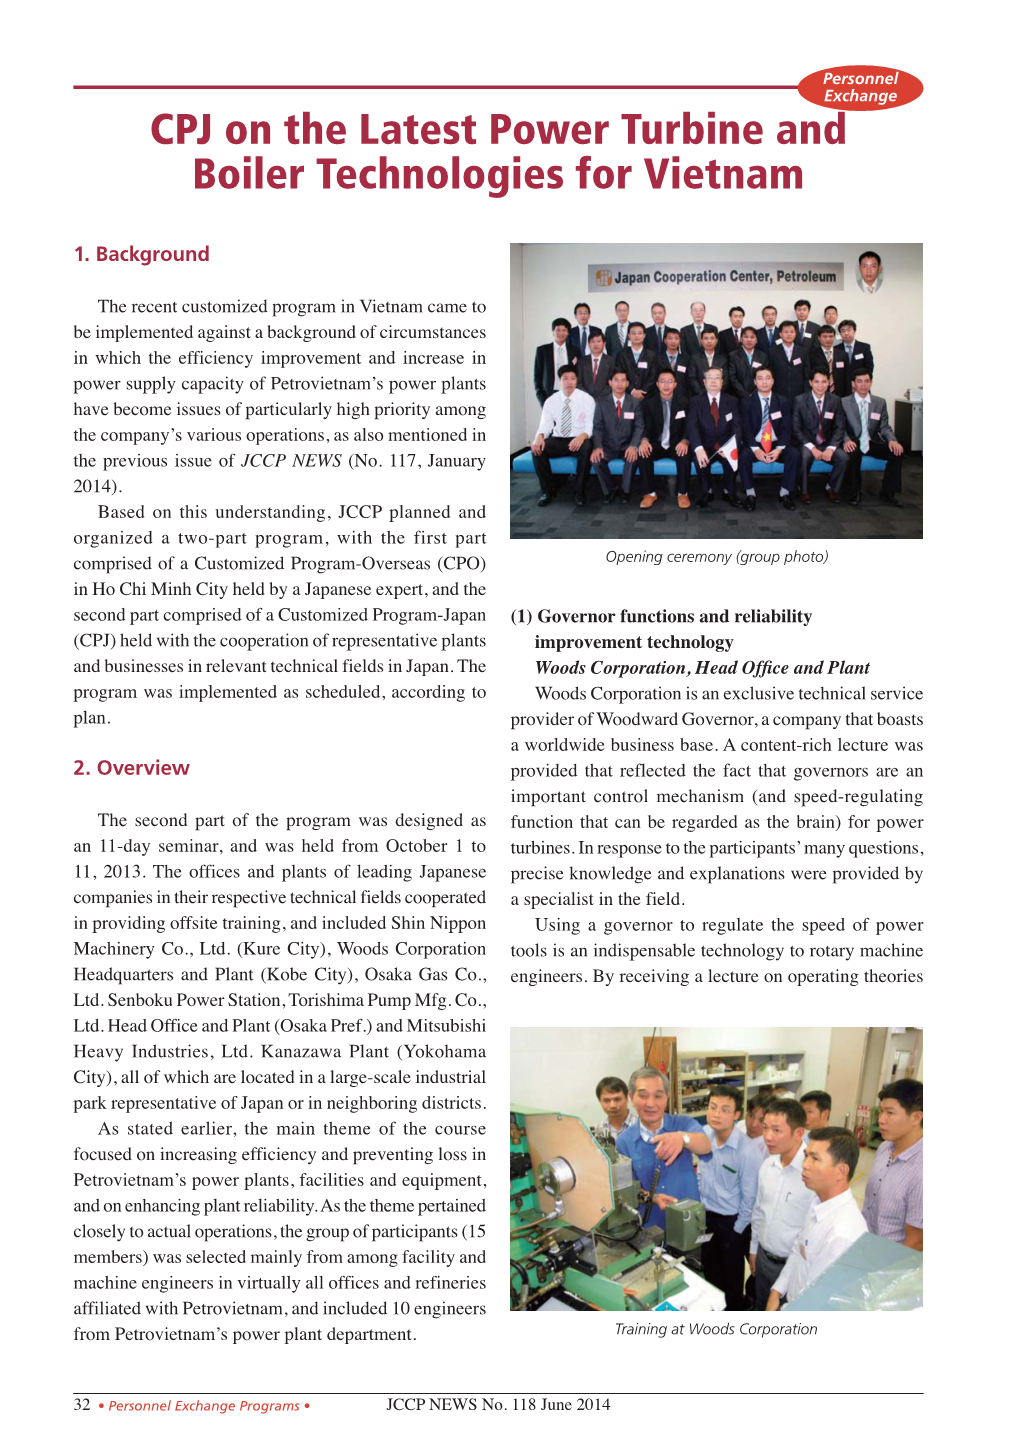 CPJ on the Latest Power Turbine and Boiler Technologies for Vietnam